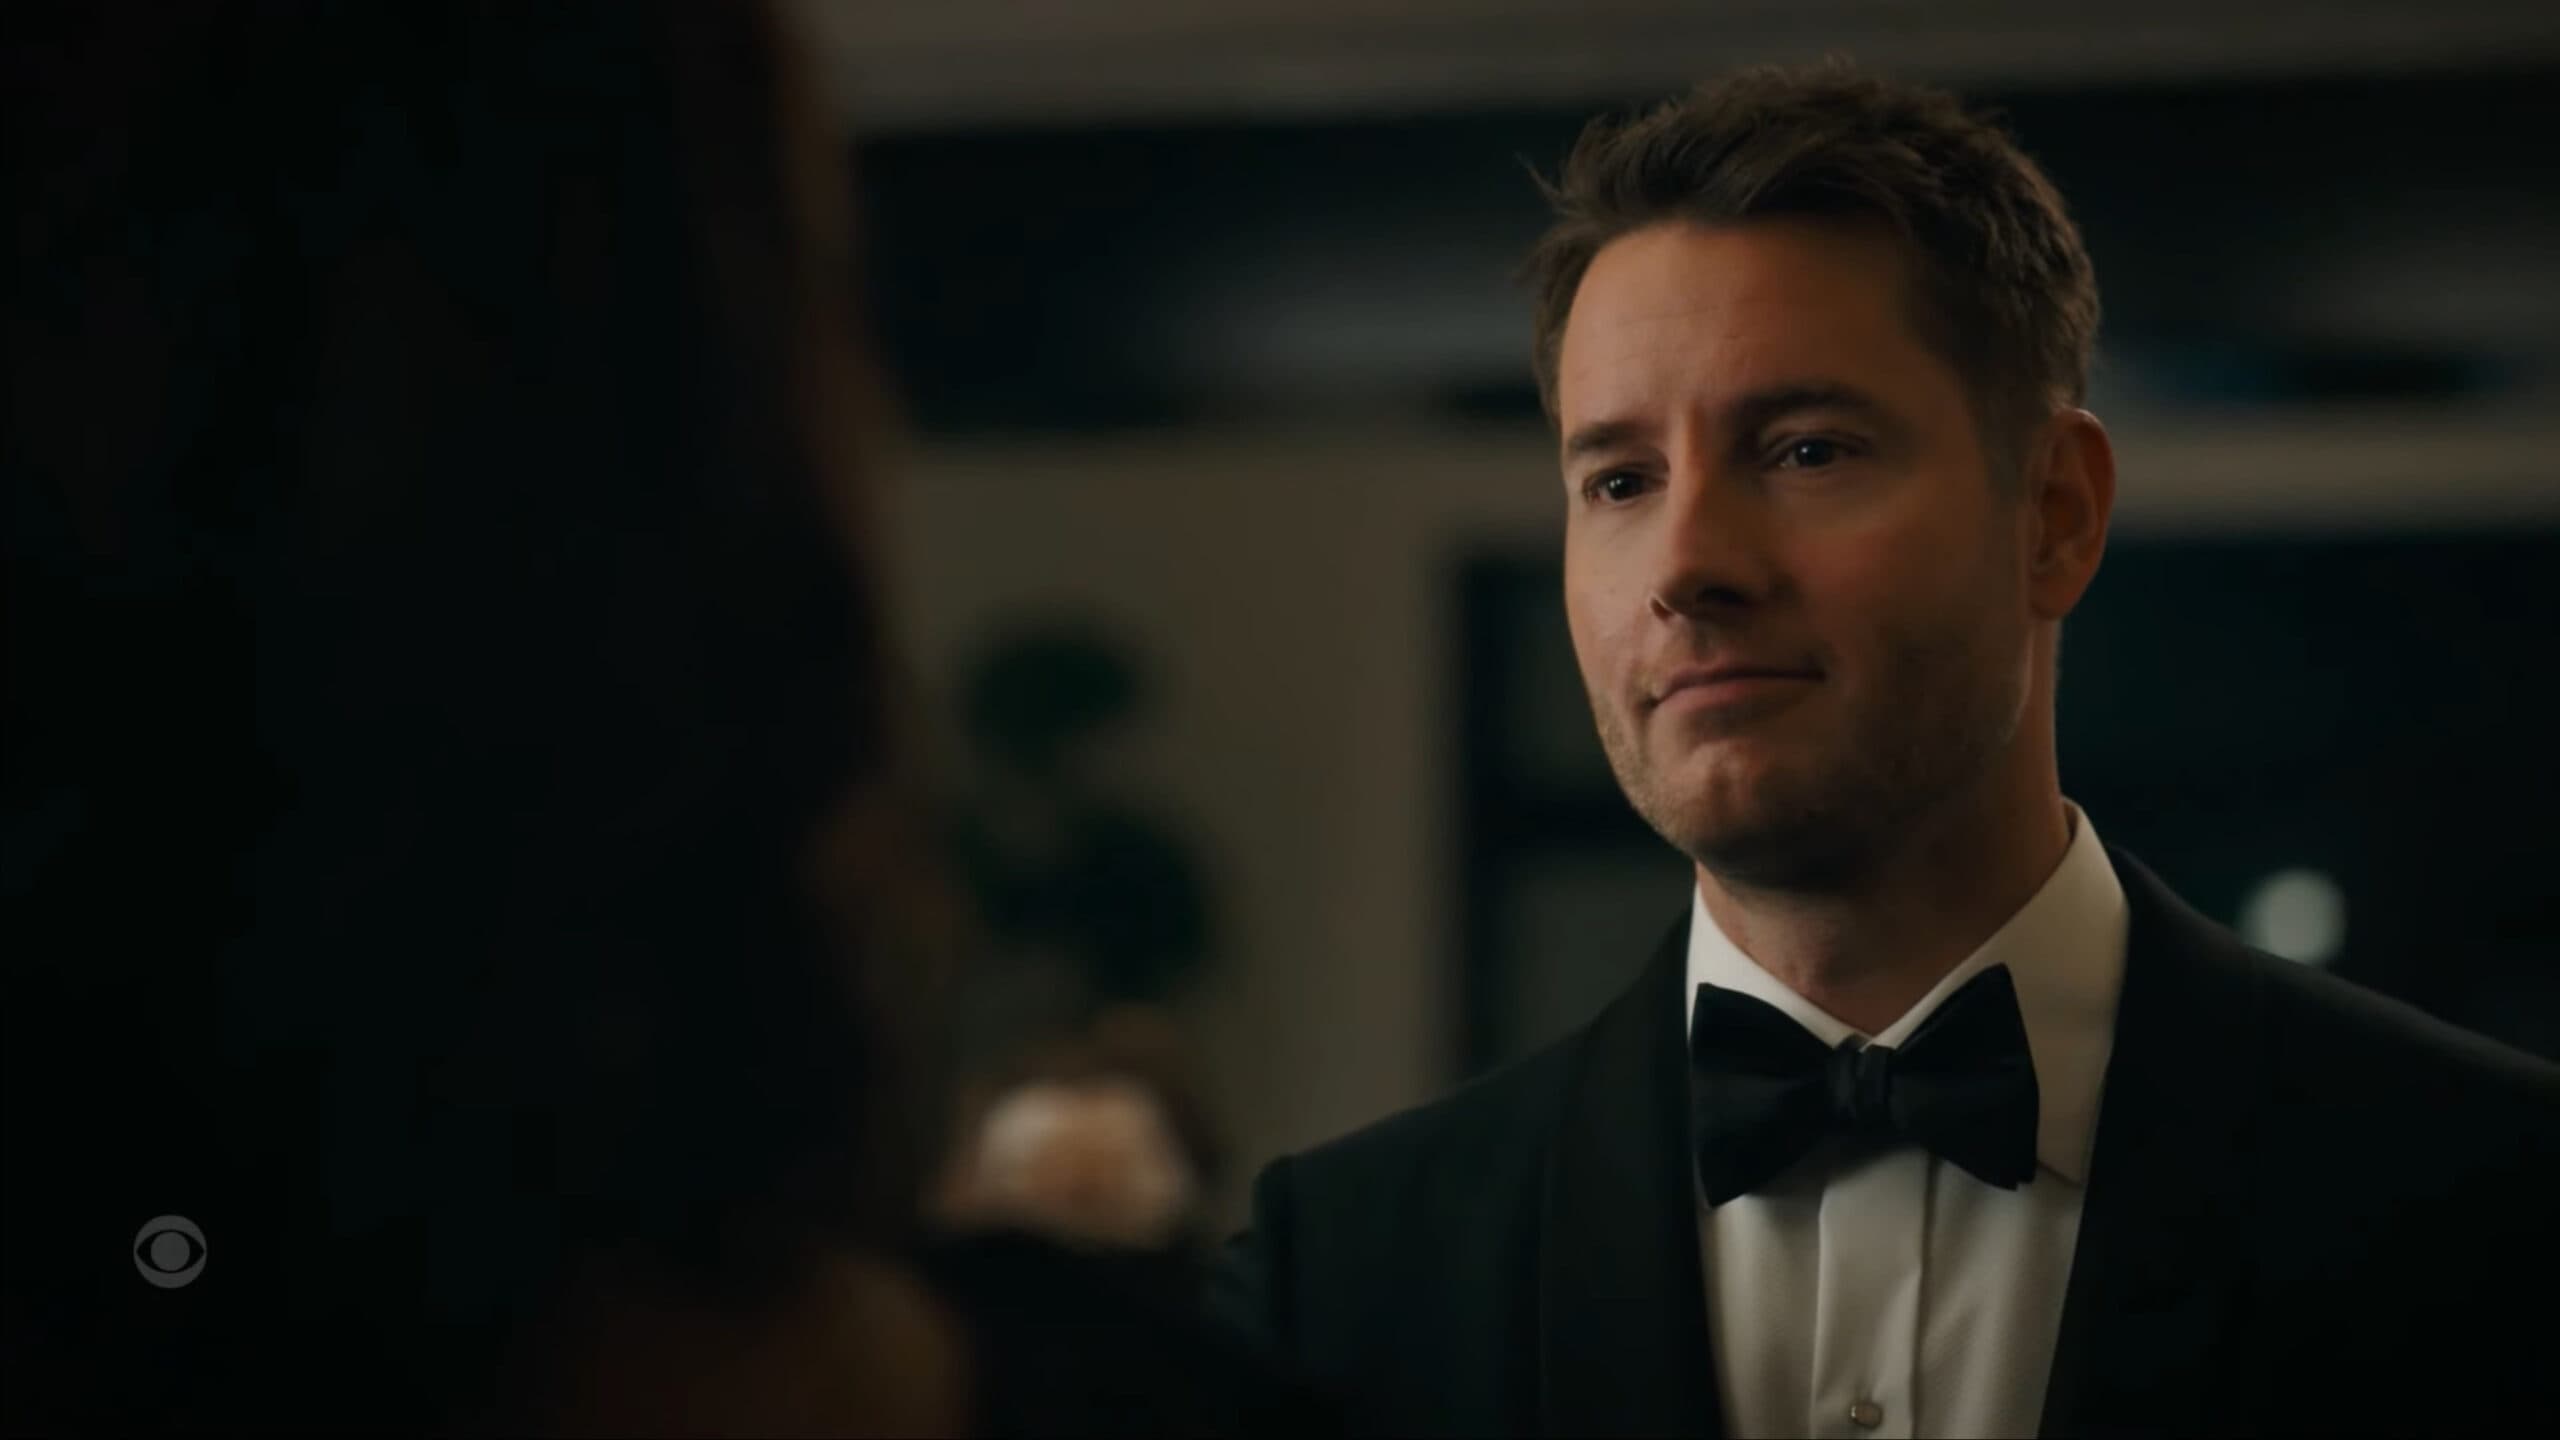 Justin Hartley as Colter in a suit